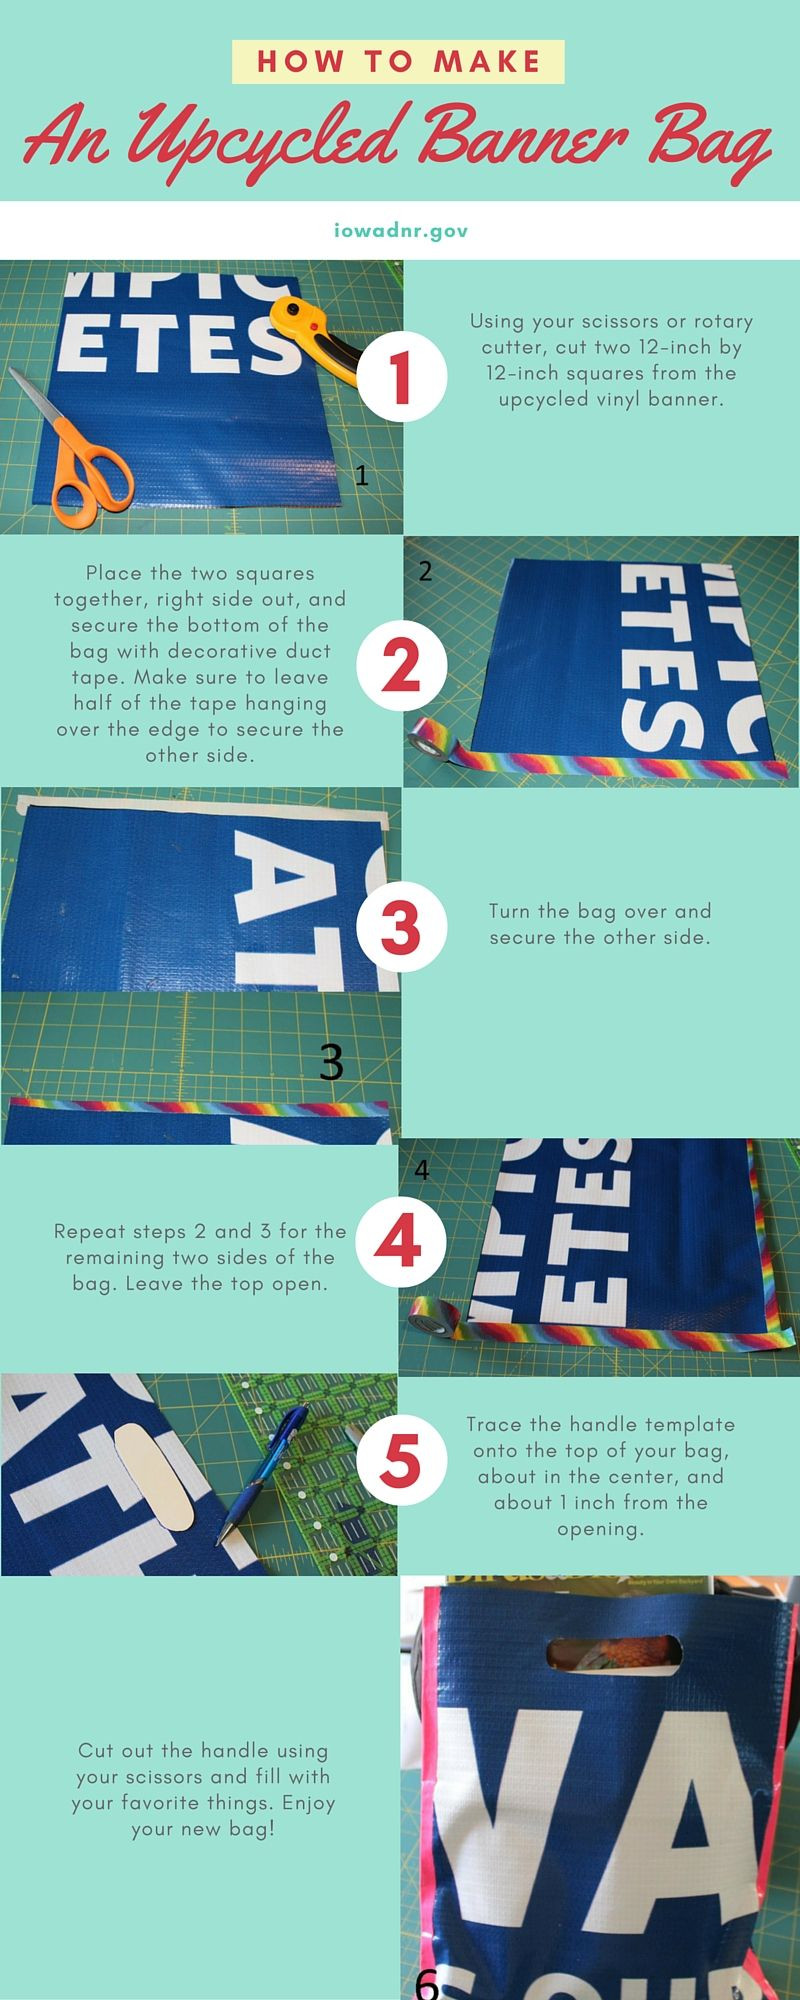 DIY Outdoor Banner
 Give Old Stuff New Life with These Upcycling Projects